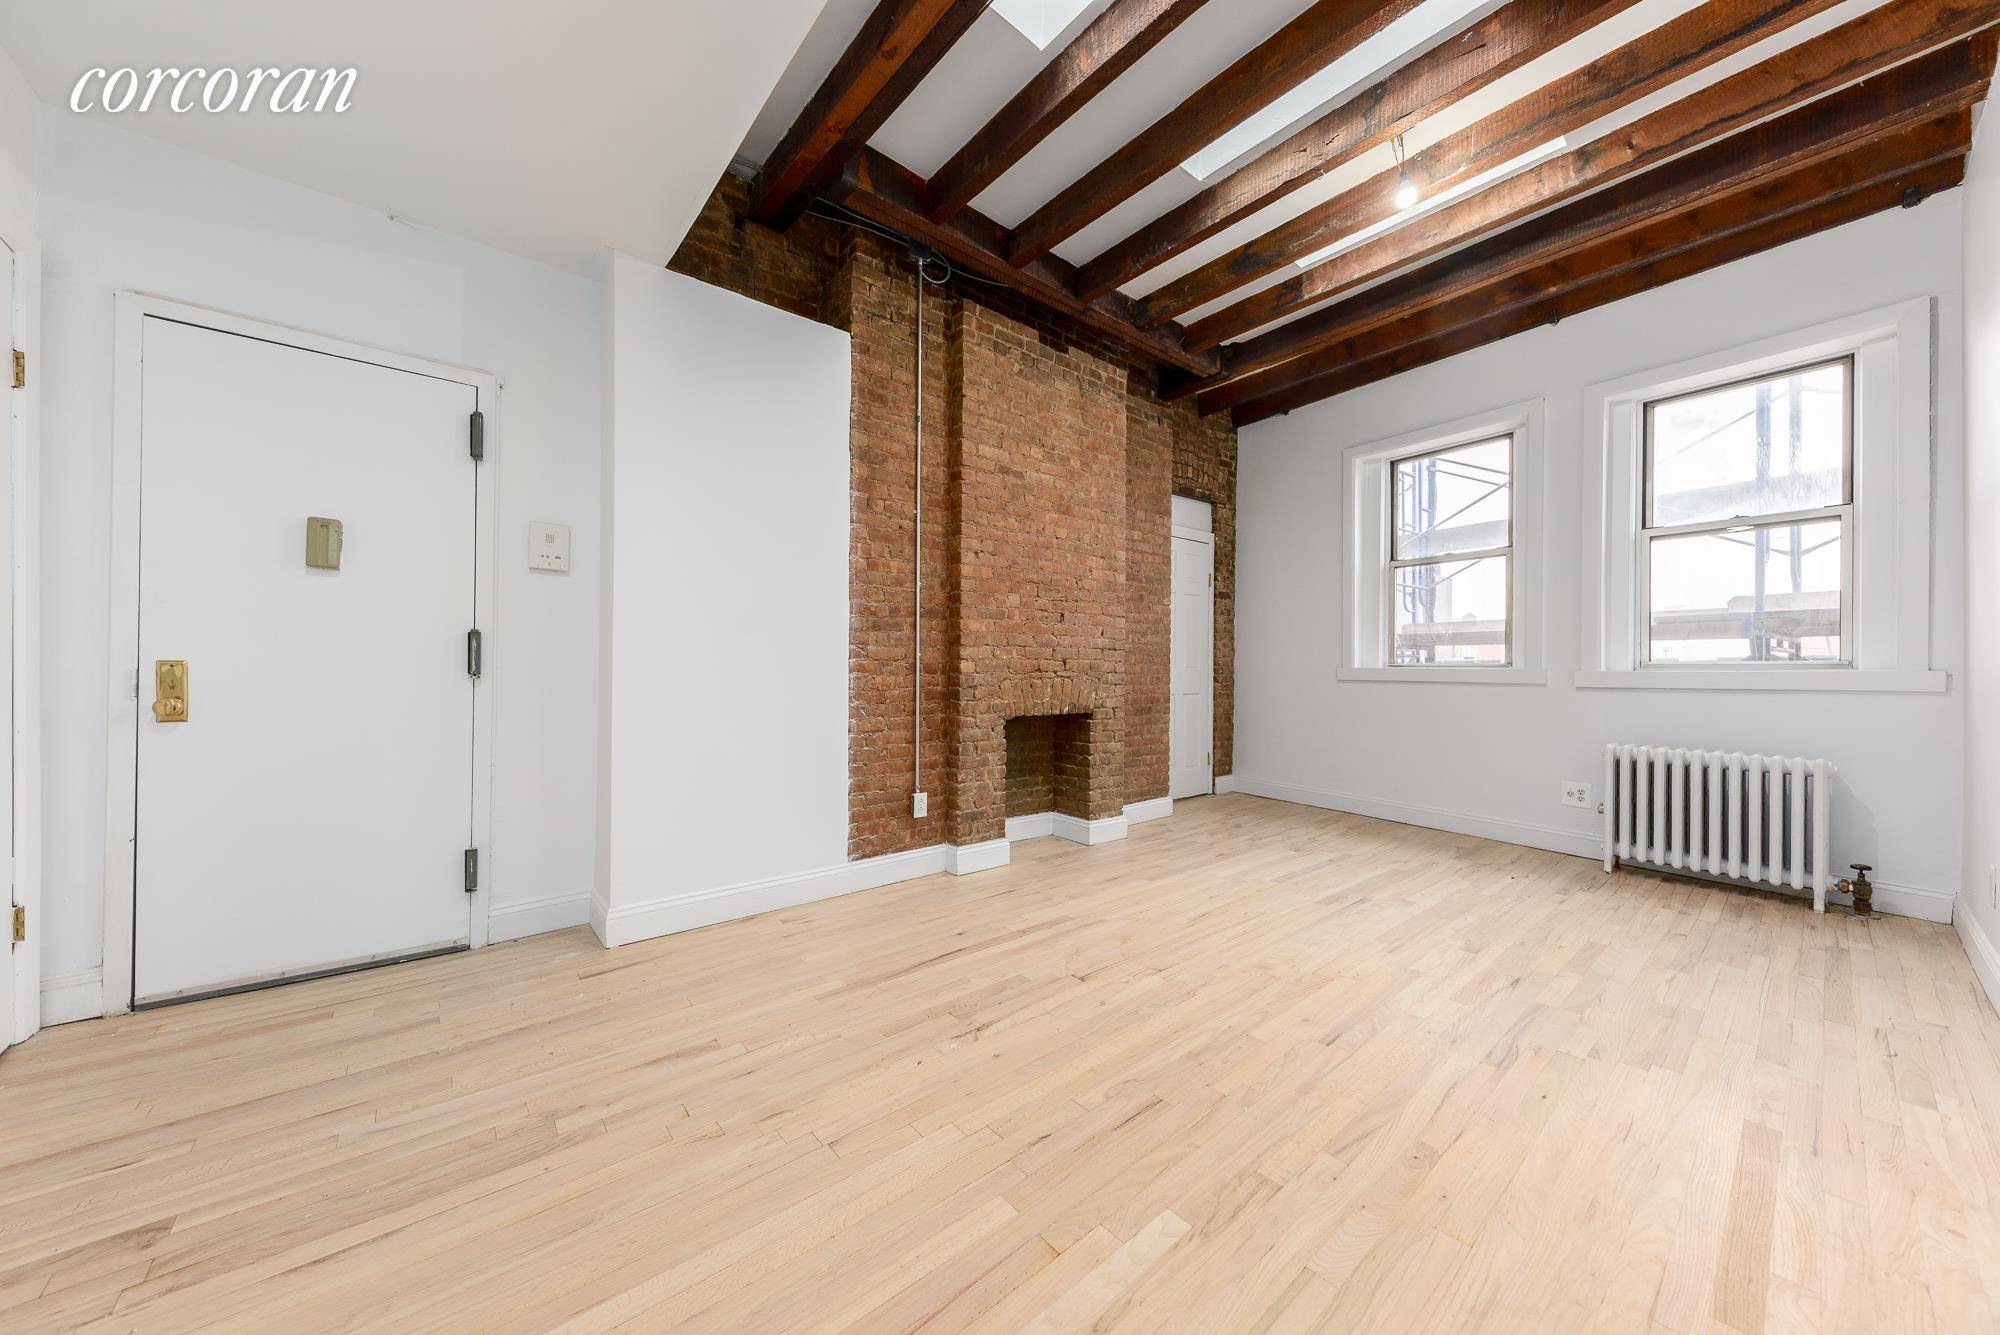 This beautifully renovated, Sun filled 2 bedrooms, 1 bath features Extensive Living space rich with character, exposed brick wall, high beamed ceiling with 3 Skylights and refinished hardwood floors partially ...